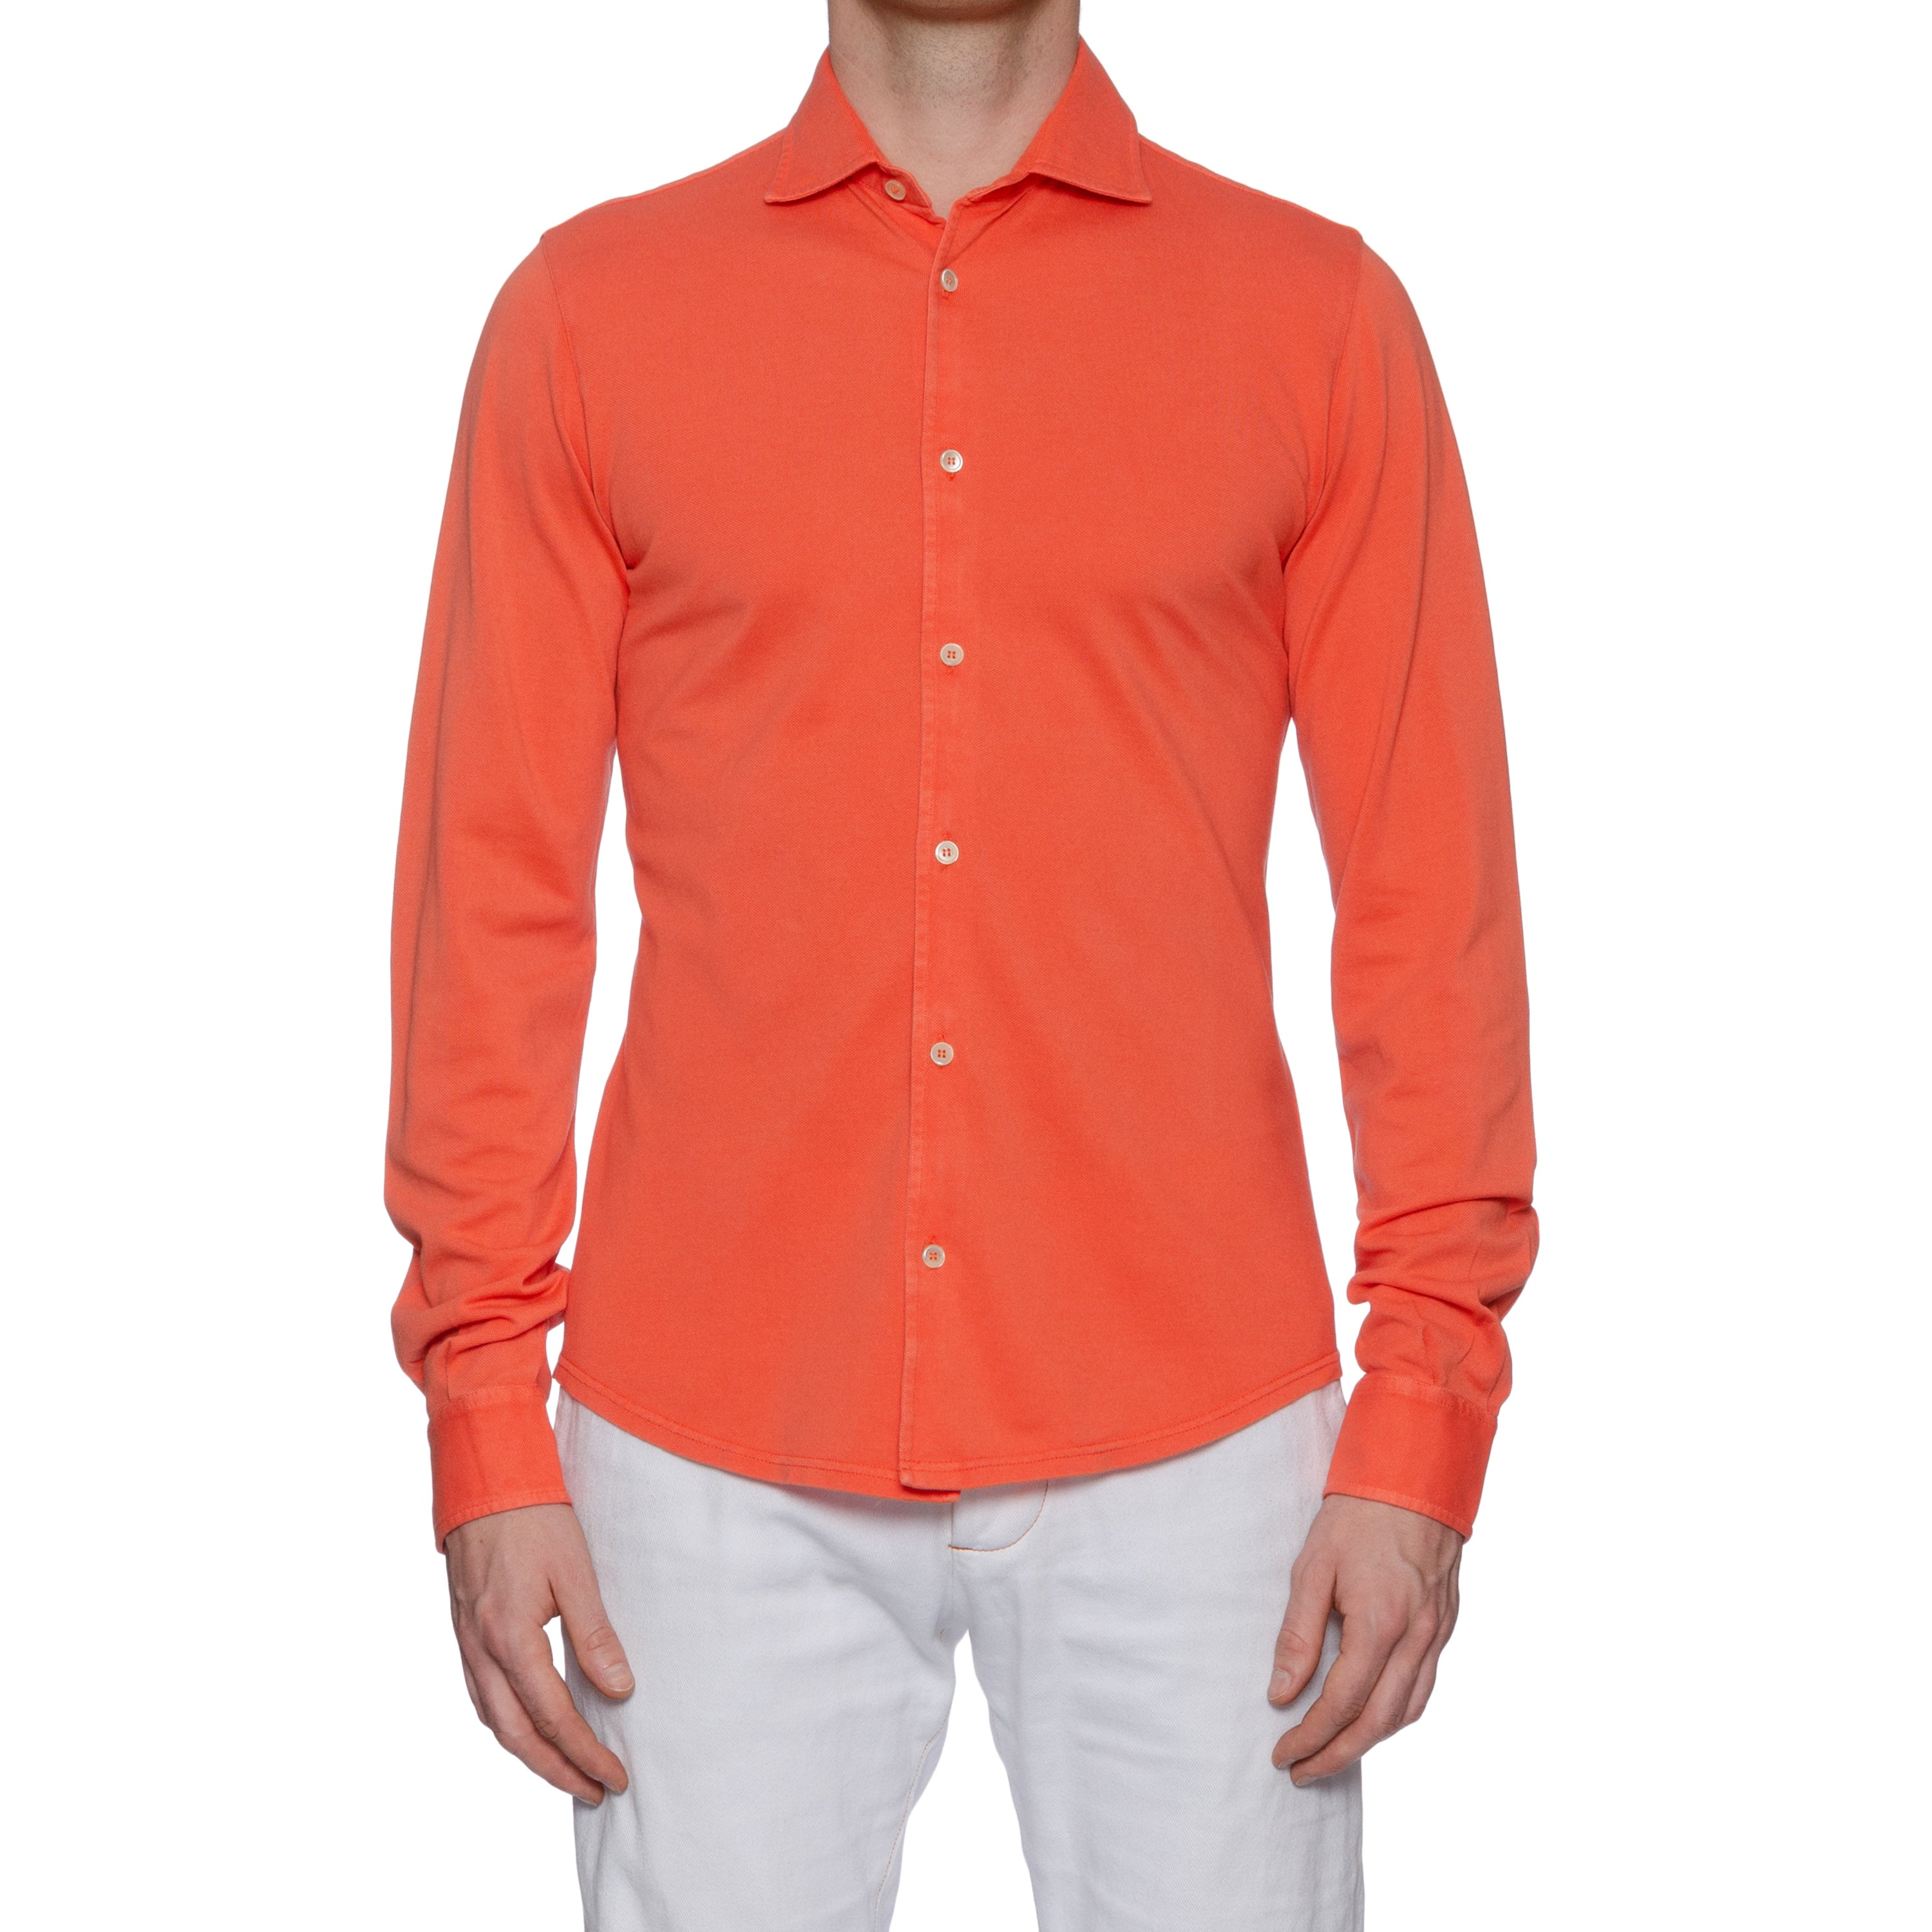 FEDELI "Steve" Coral Cotton Pique Frosted Long Sleeve Polo Shirt NEW FEDELI